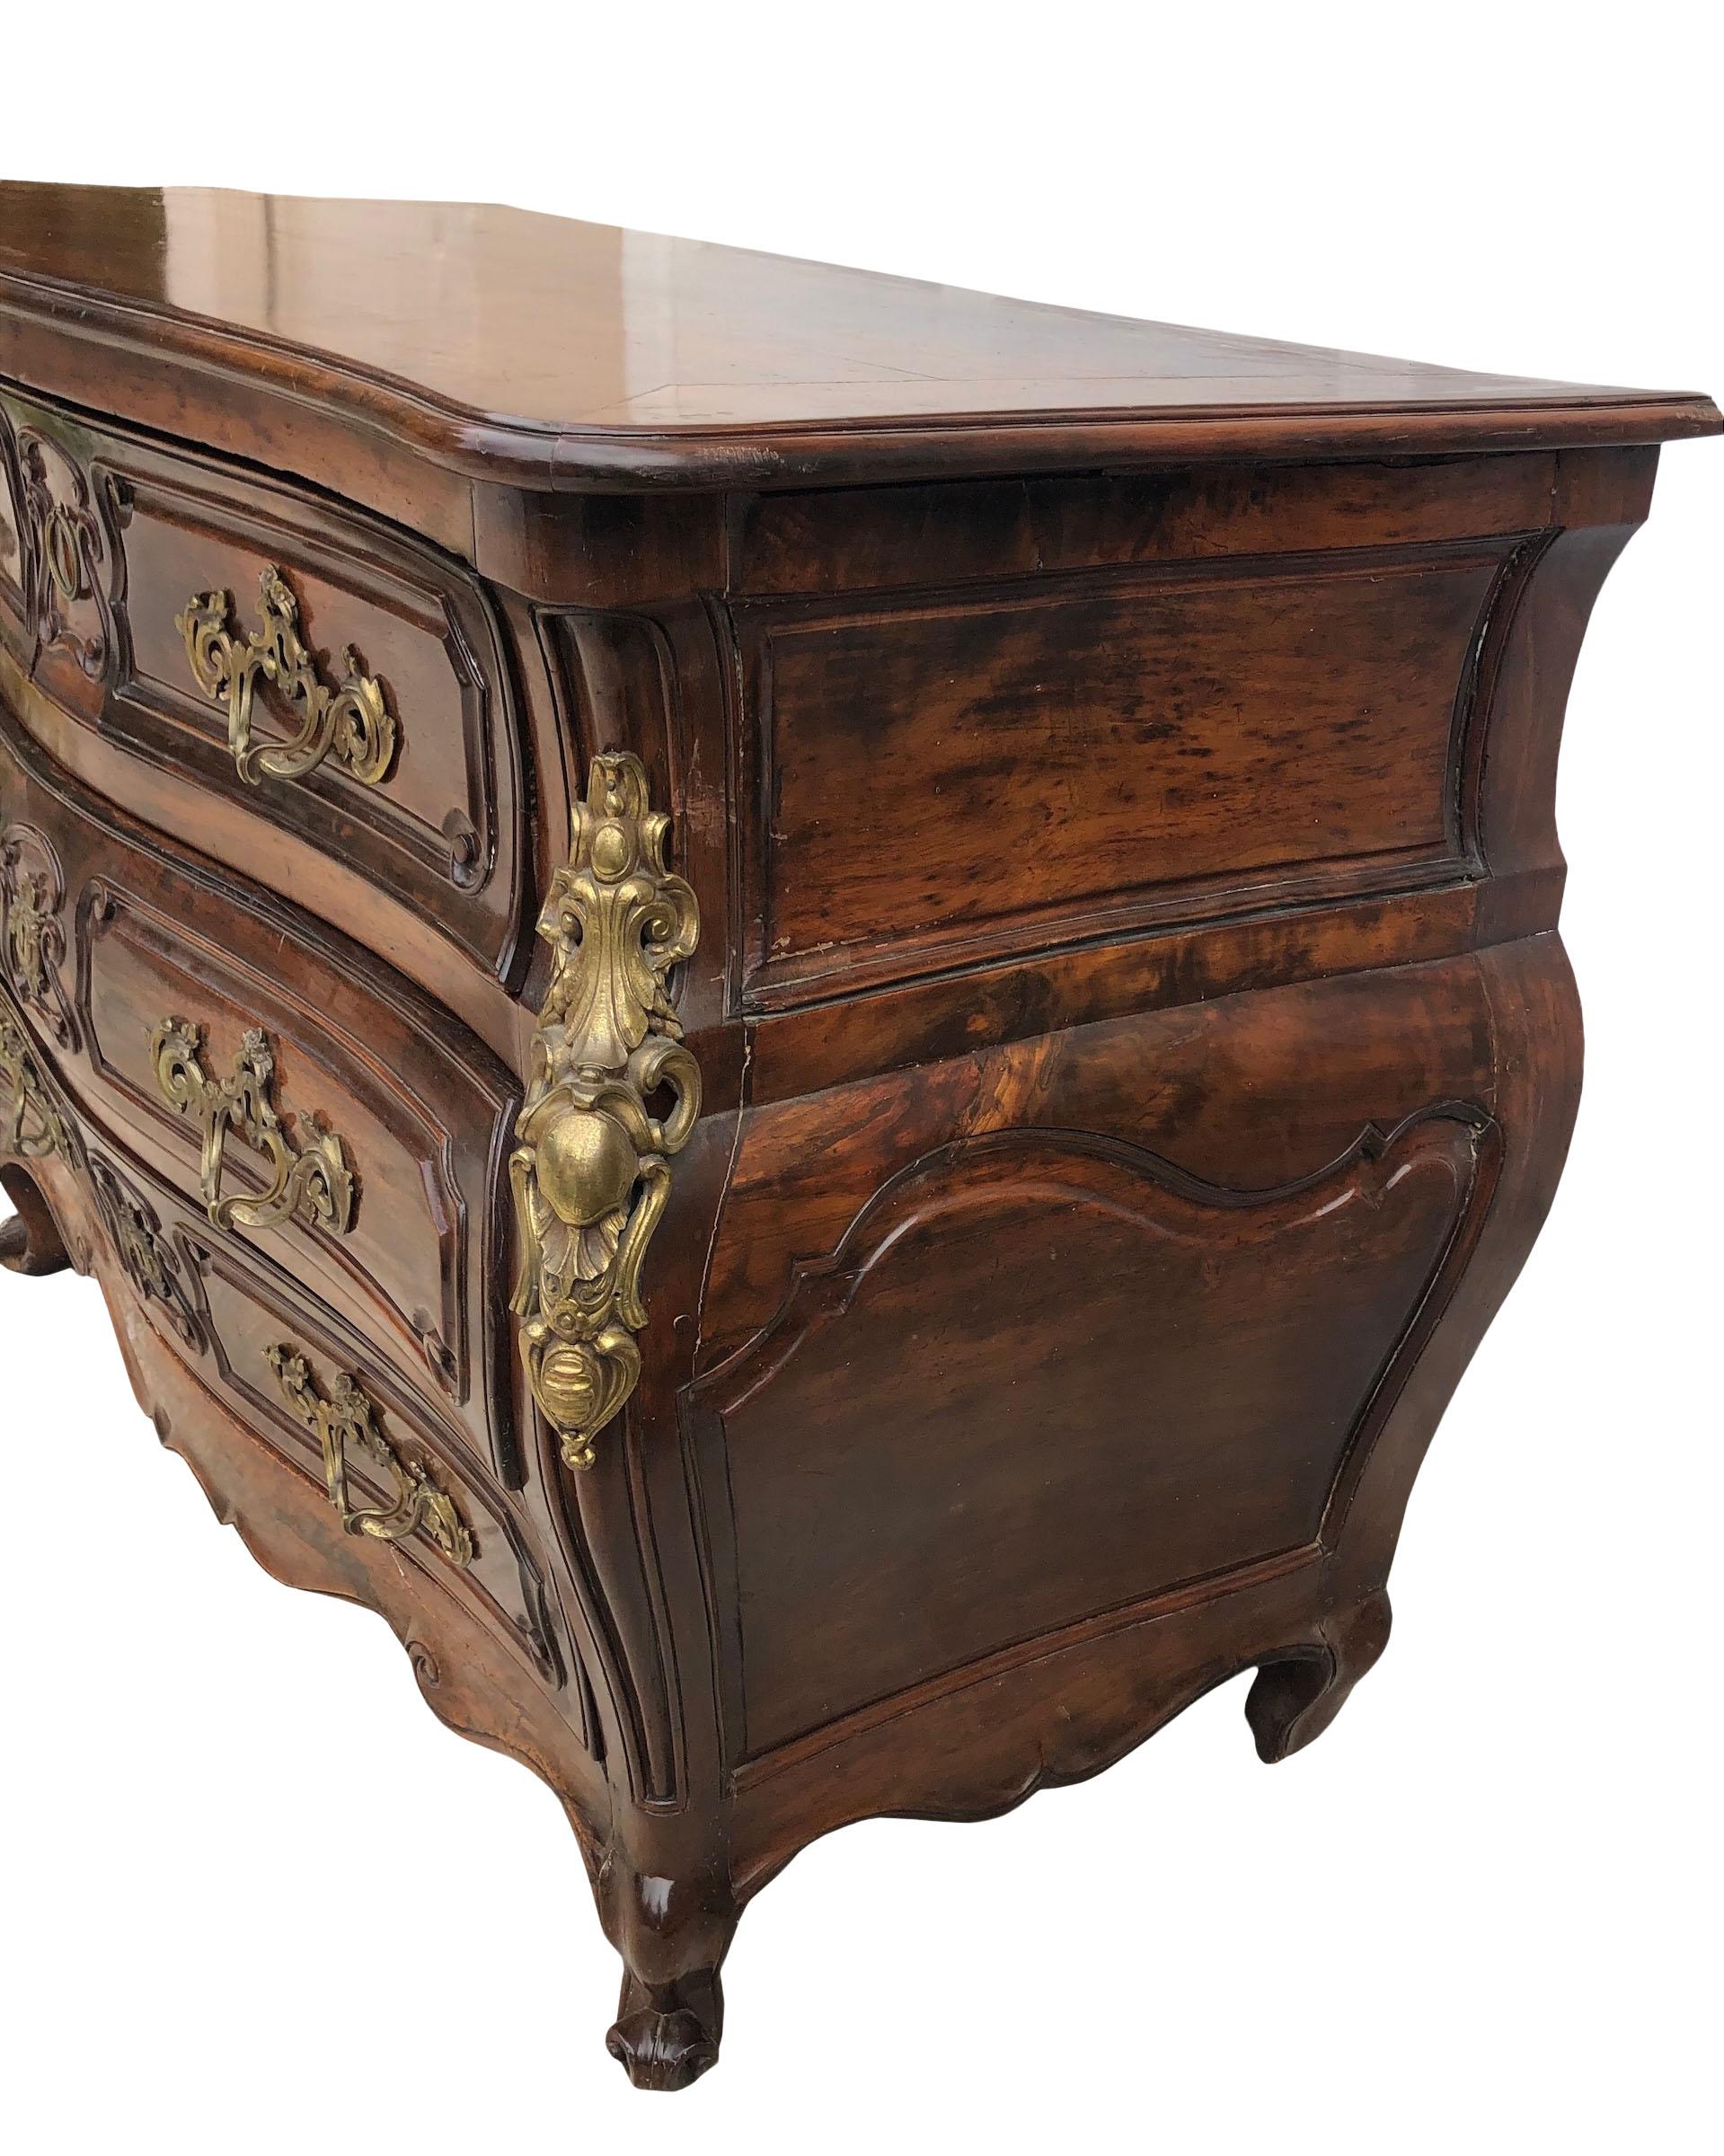 A beautiful commode from France Circa 1740s with bronze fittings. Commode has five drawers including a hidden drawer in the middle on top. The drawers are beautifully lined and trimmed in beige silk blend fabric except the hidden drawer. Original